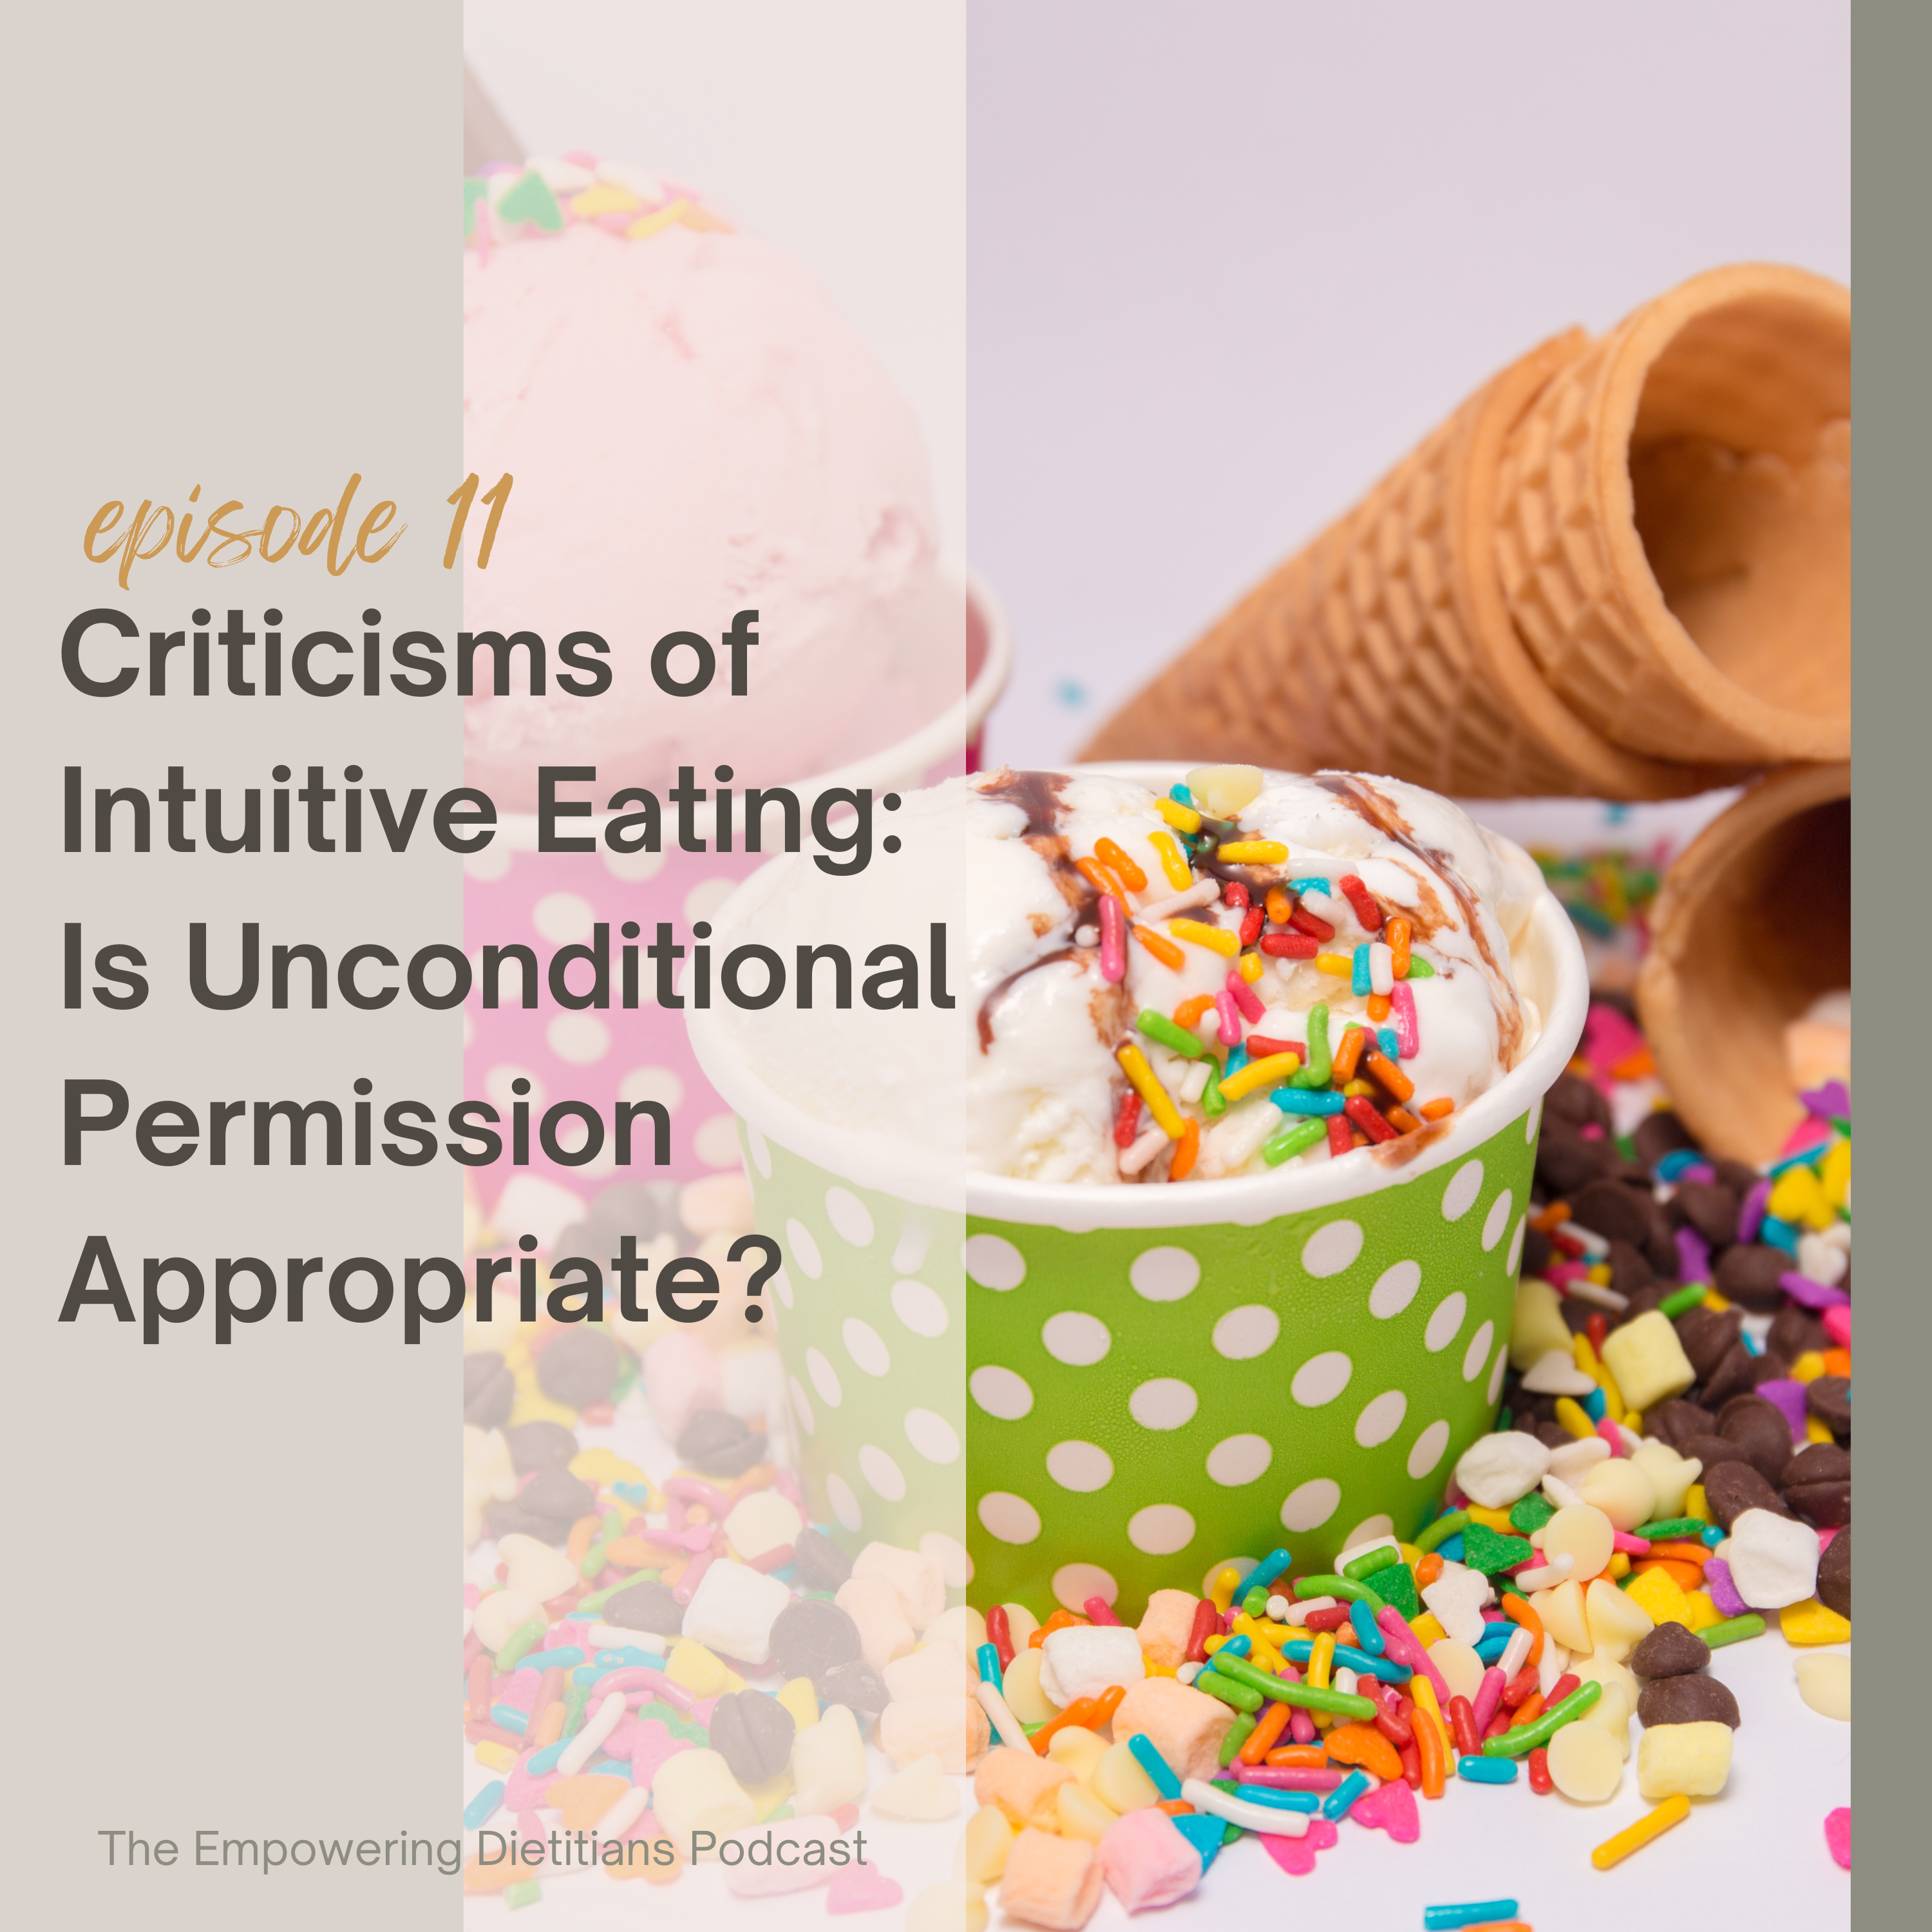 criticisms of intuitive eating: is unconditional permission appropriate?